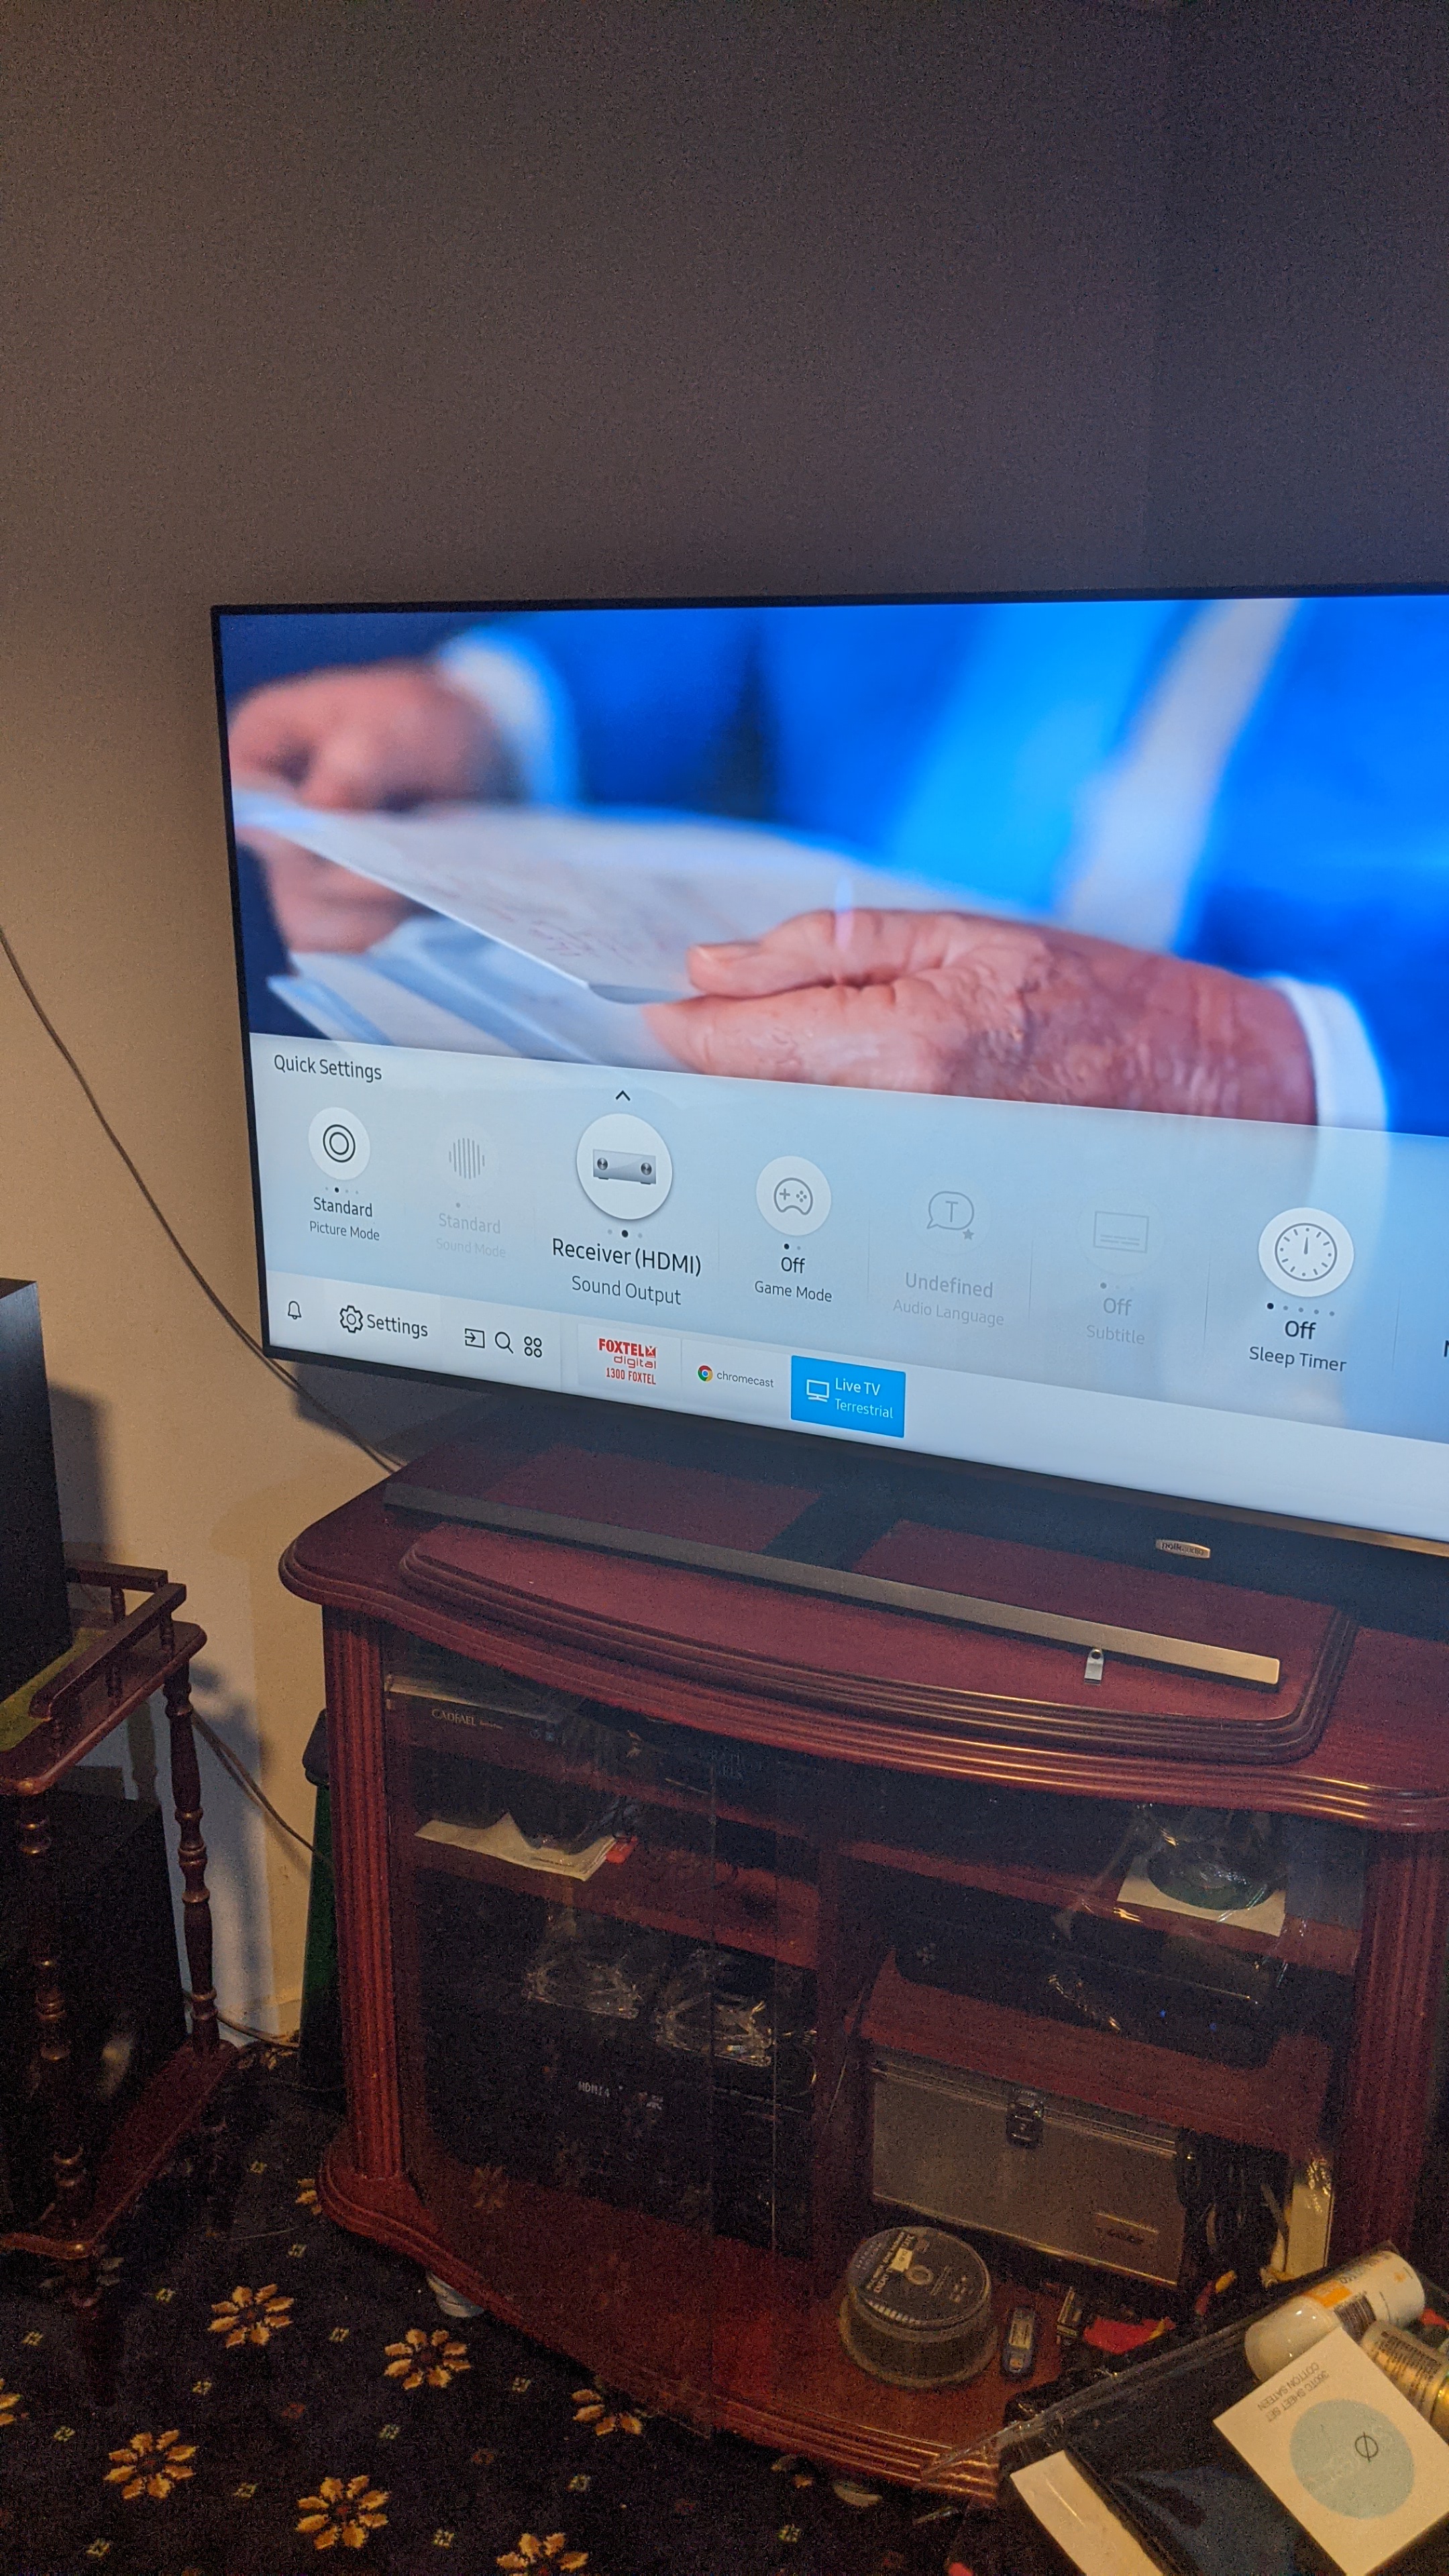 The receiver does not on when I turn on the TV Page 3 - Samsung Community